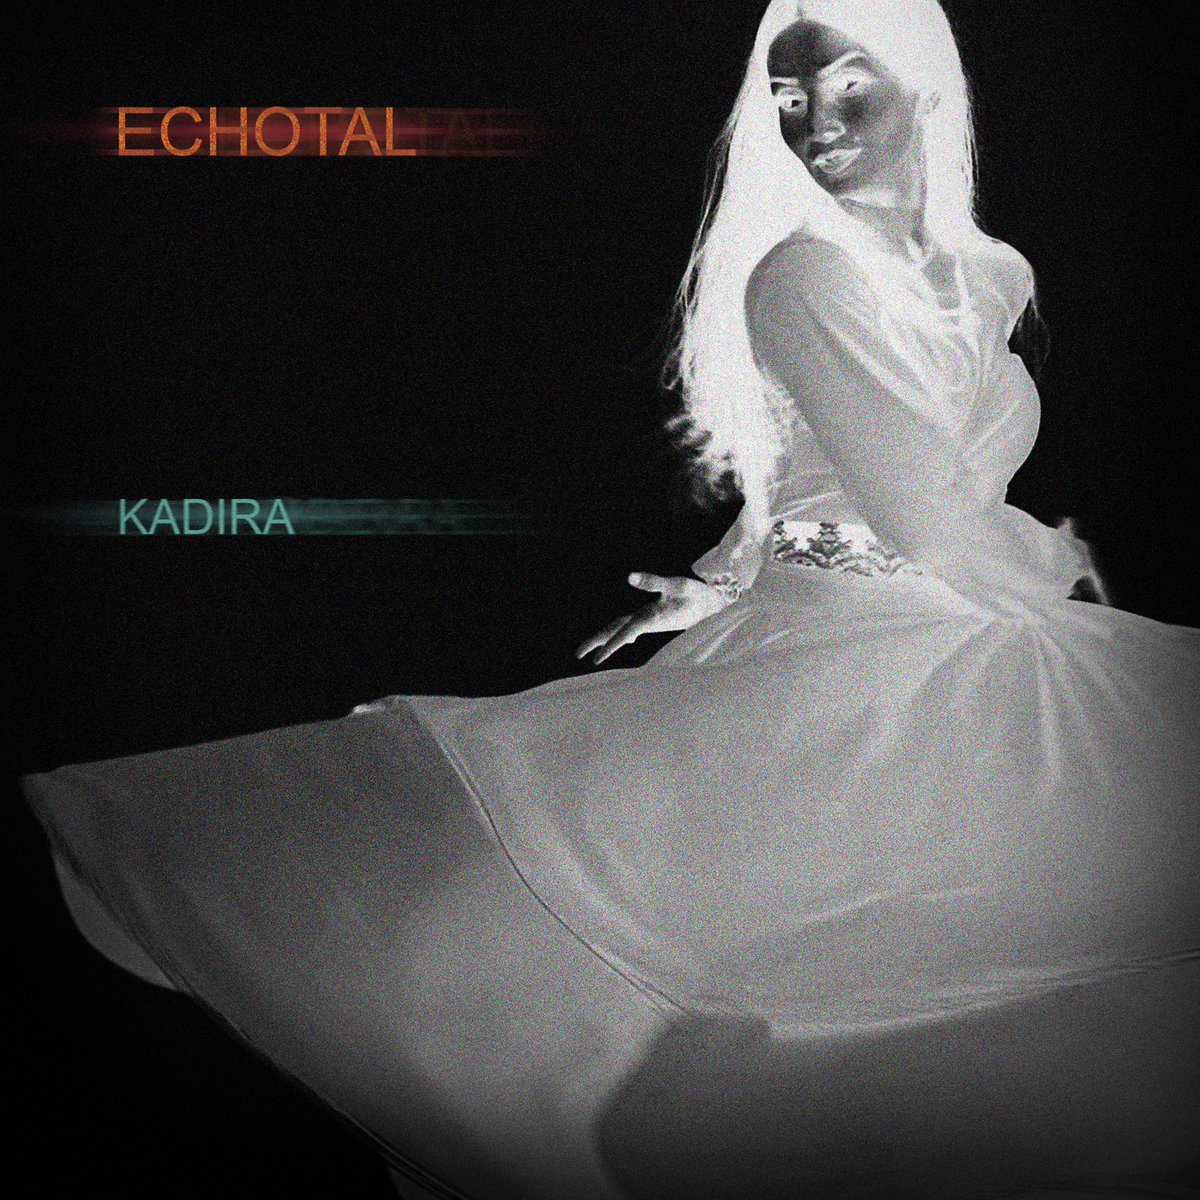 'Kadira' by Echotal open.spotify.com/album/5FKPVJY7… Acoustic guitars - David Rooney and Torsten Kinsella Acoustic/Electric Cellos and Vocals - Jo Quail Electric Bass - Niels Kinsella Mastered by Streaky